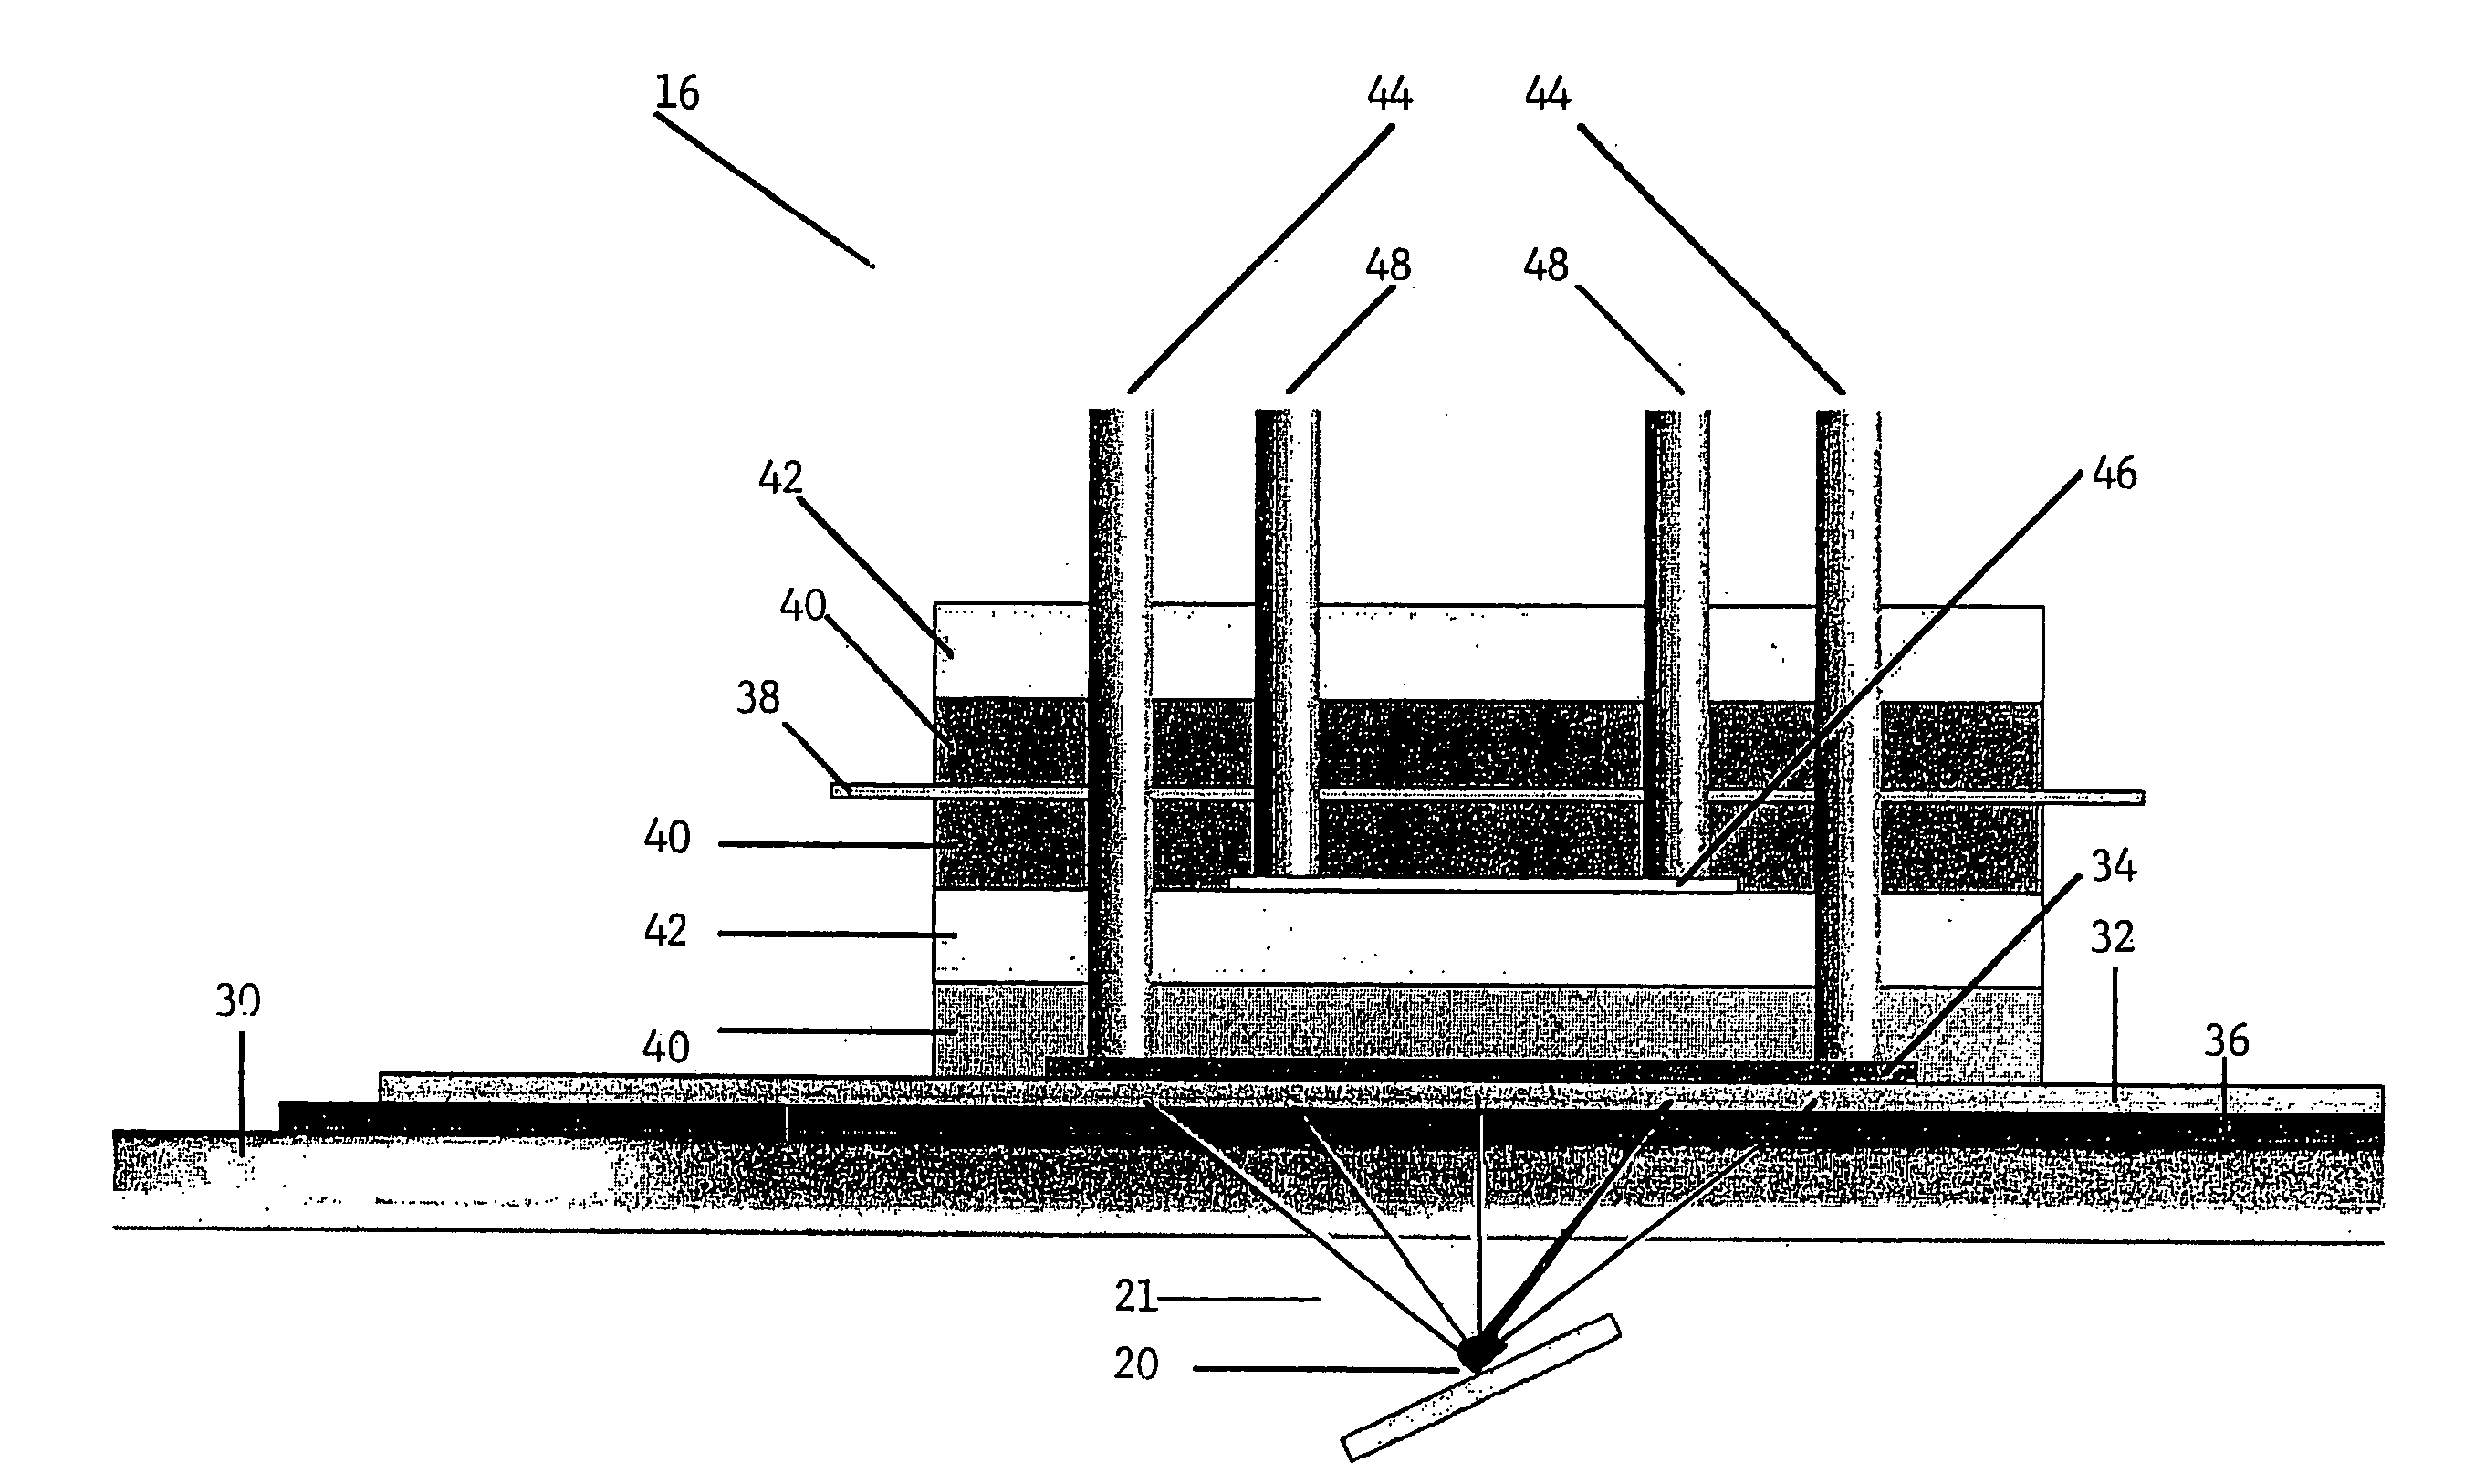 Photolytic oxygenator with carbon dioxide fixation and separation